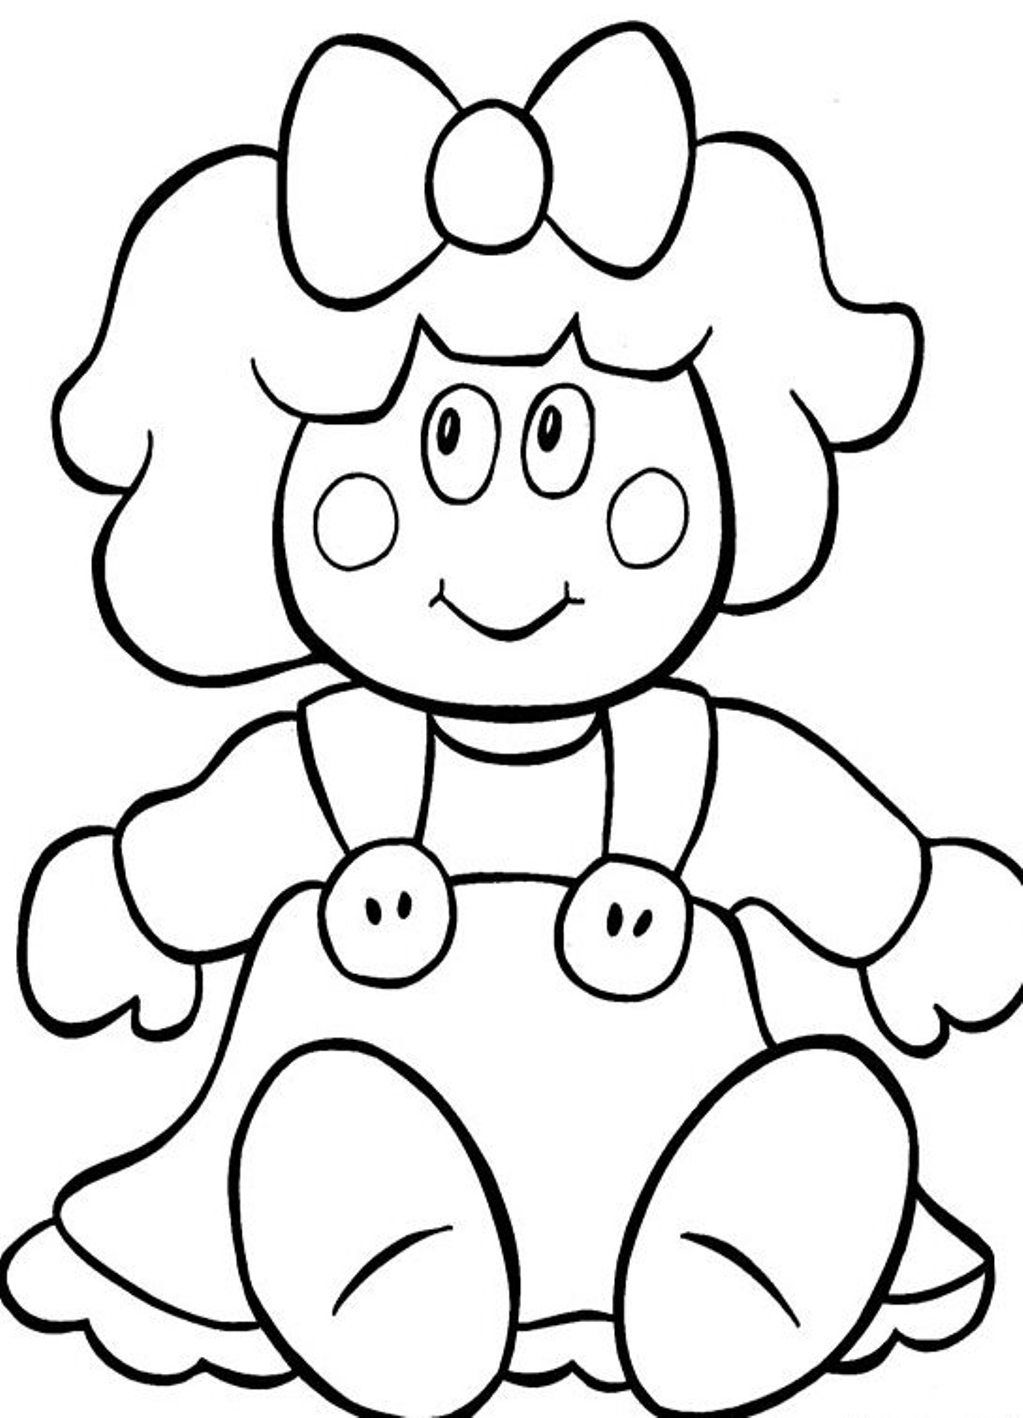 Free Coloring Pages Dolls, Download Free Coloring Pages Dolls png